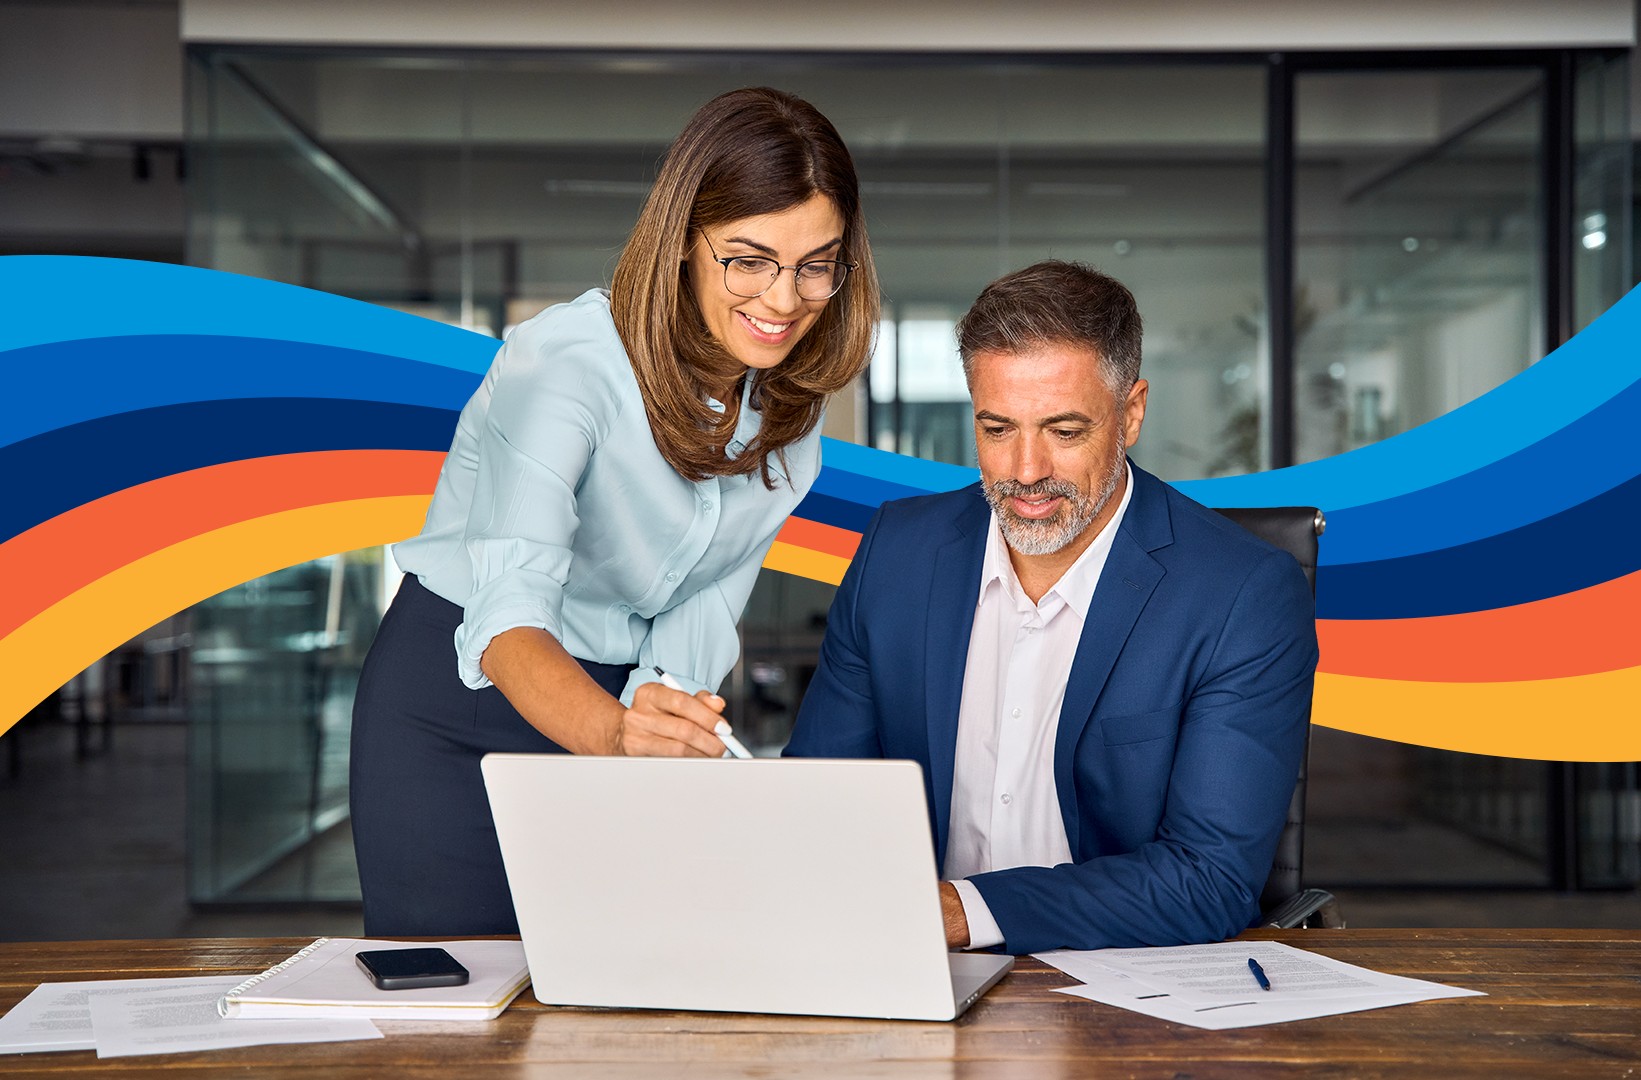 Two businesspeople looking at a laptop in an office